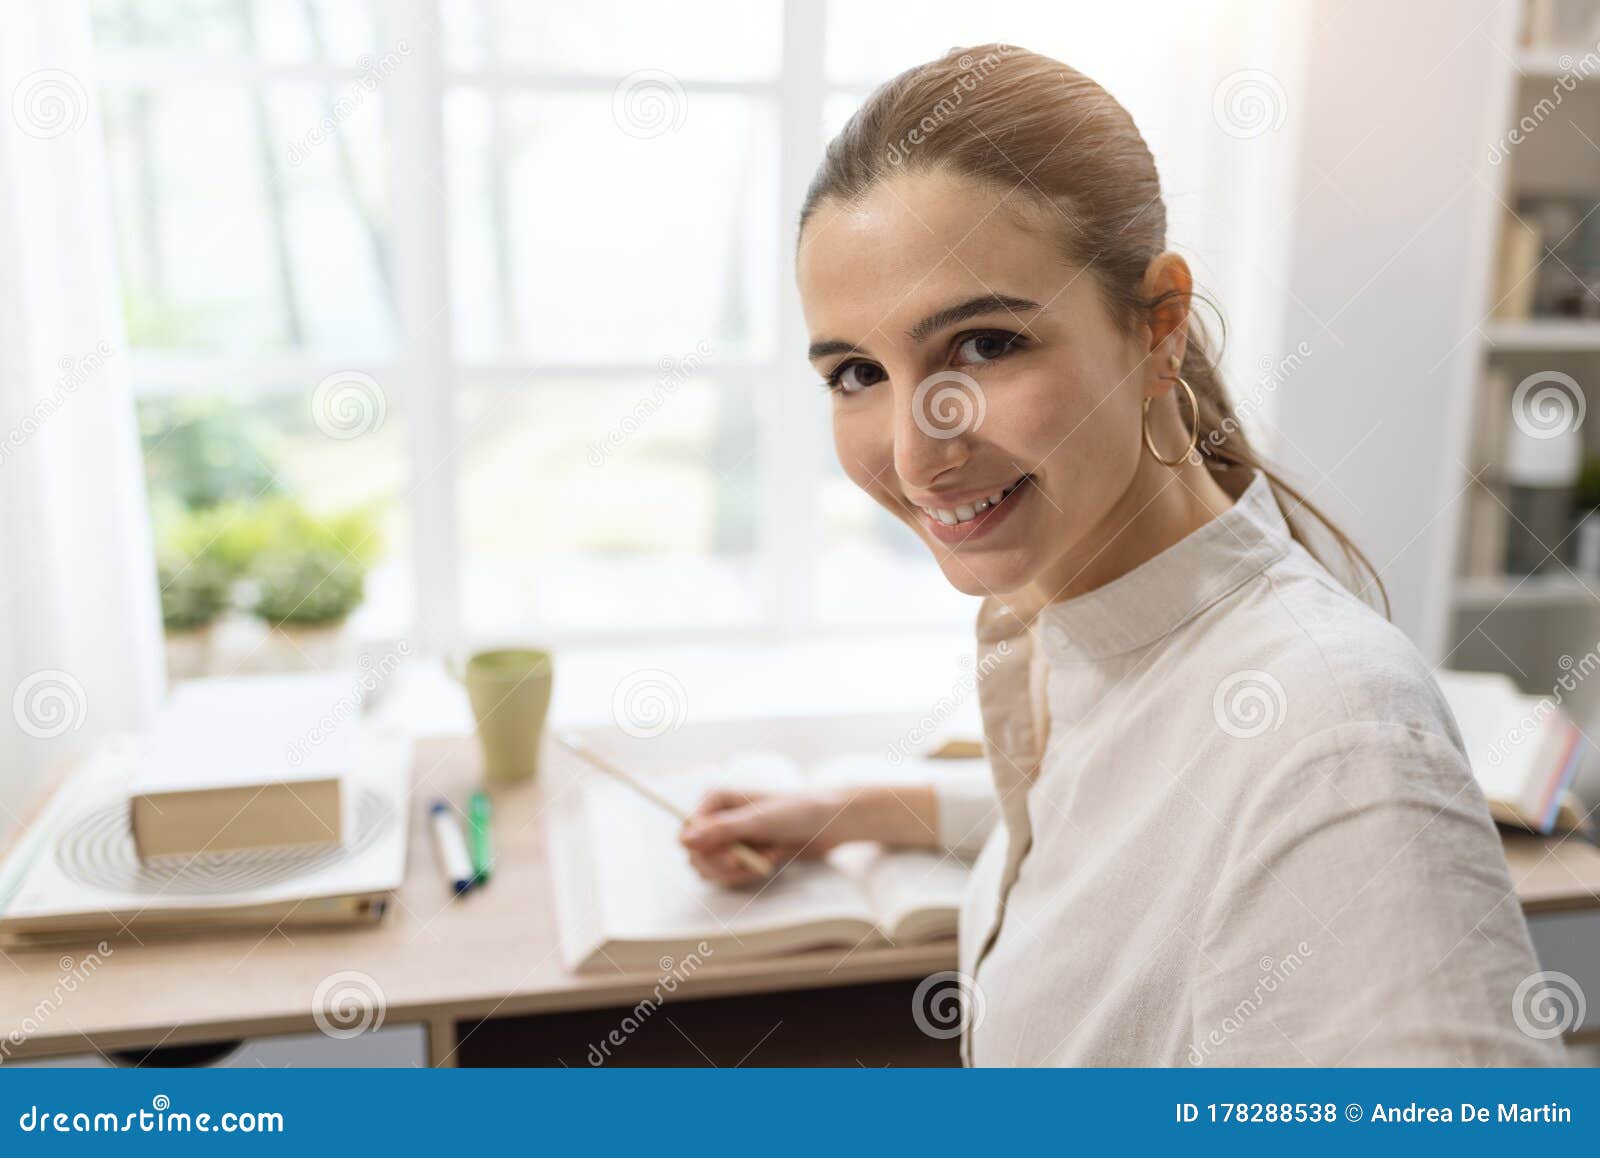 Woman Studying at Home and Smiling Stock Photo - Image of studying ...